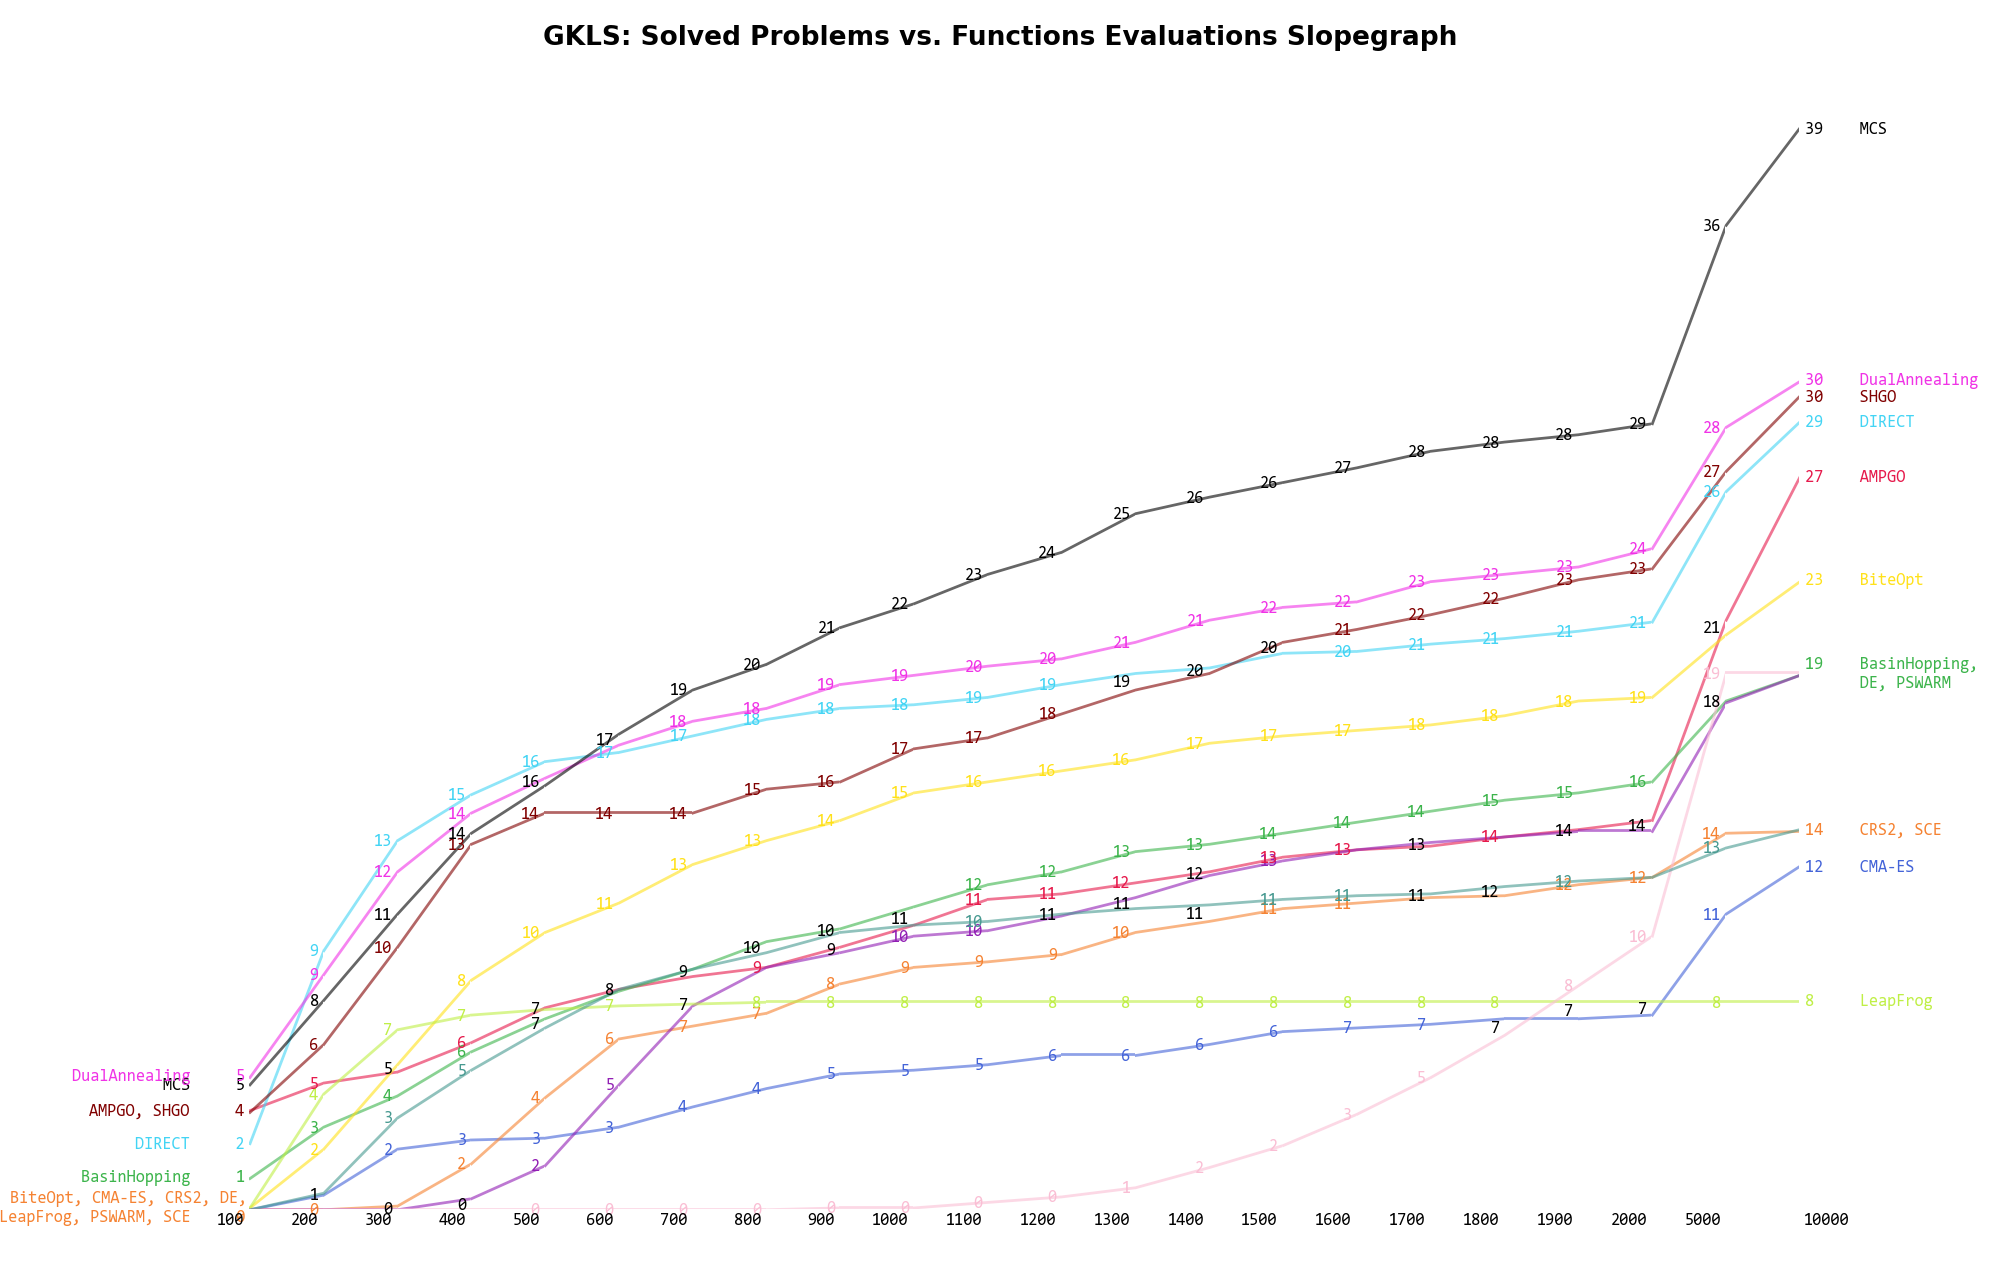 Percentage of problems solved given a fixed number of function evaluations on the GKLS test suite